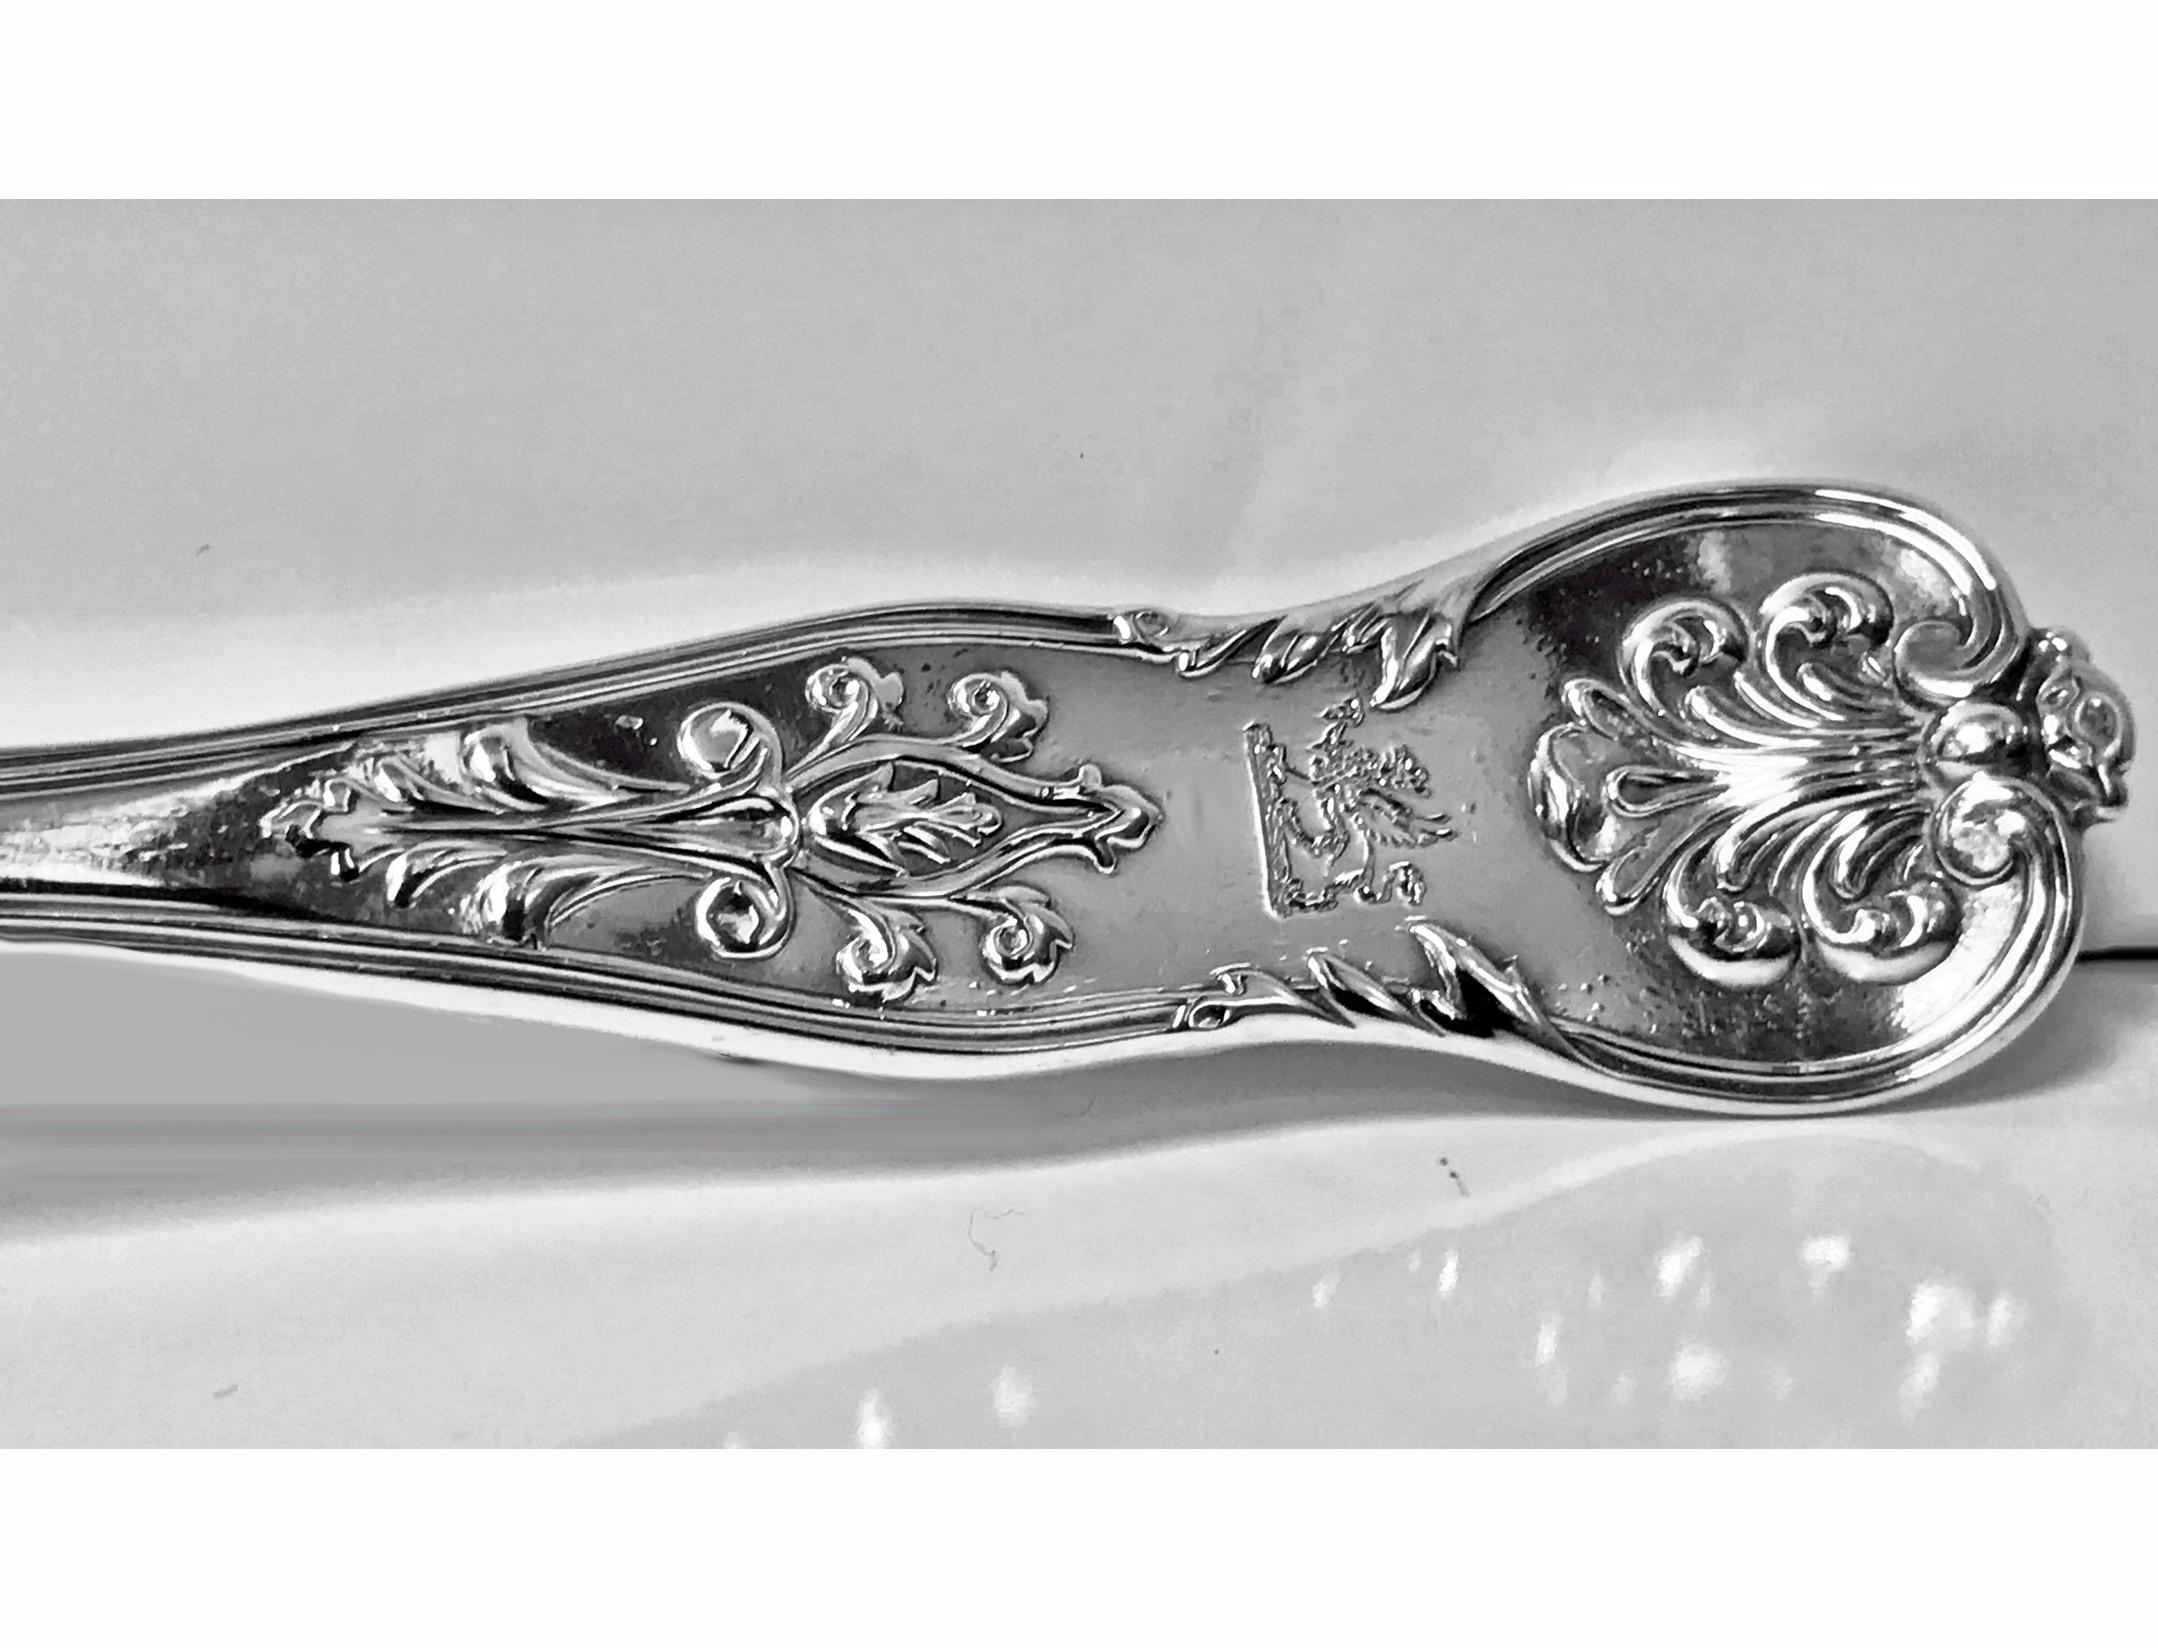 Rare 19th century princess no 2 silver large serving basting spoon, London, 1834 Mary Chawner. Crest that of griffin passant possibly grasping a sprig. Substantial weight and quality. Length 12.125 inches. Weight: 194 grams. Excellent patina and